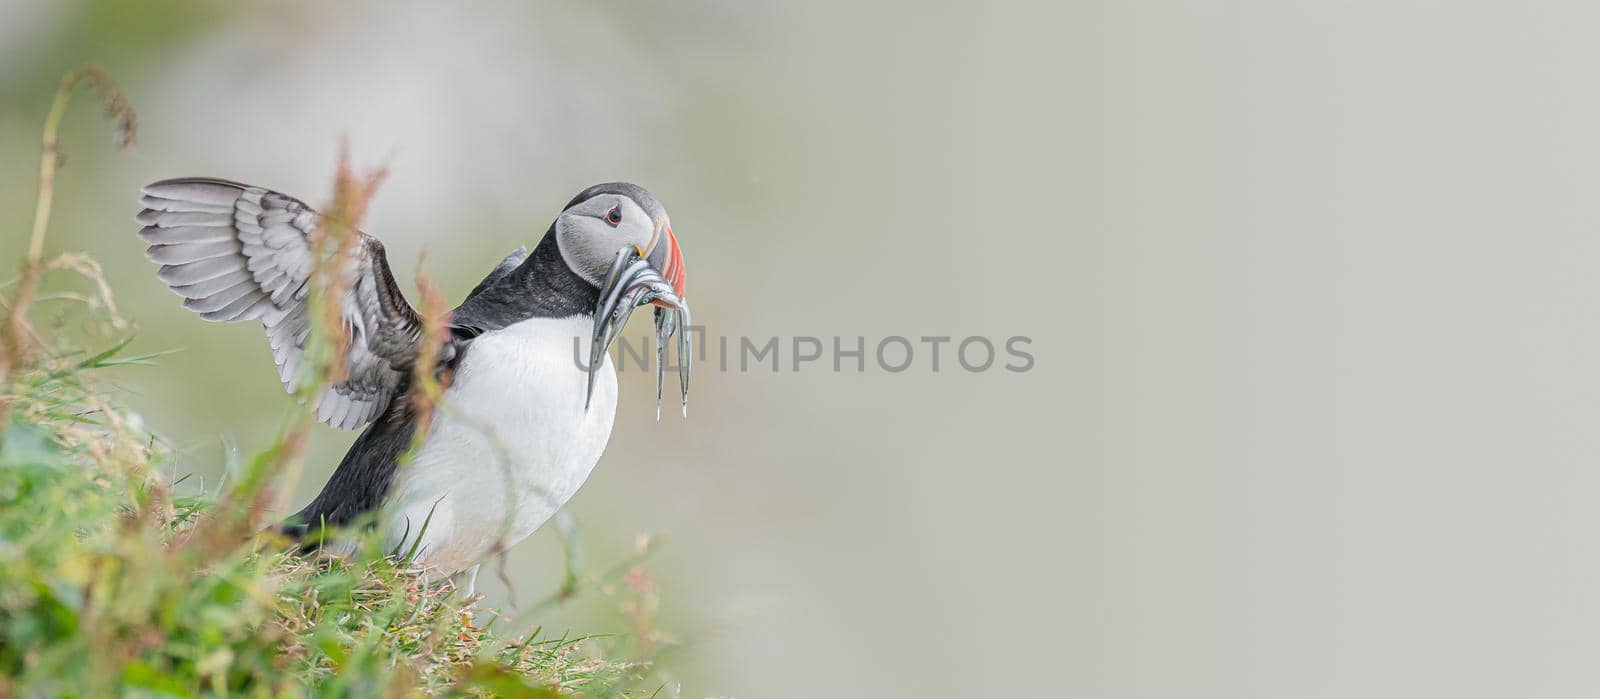 North Atlantic puffin with herring fish in its beak at Faroe island Mykines, with copy space for text, late summer, closeup